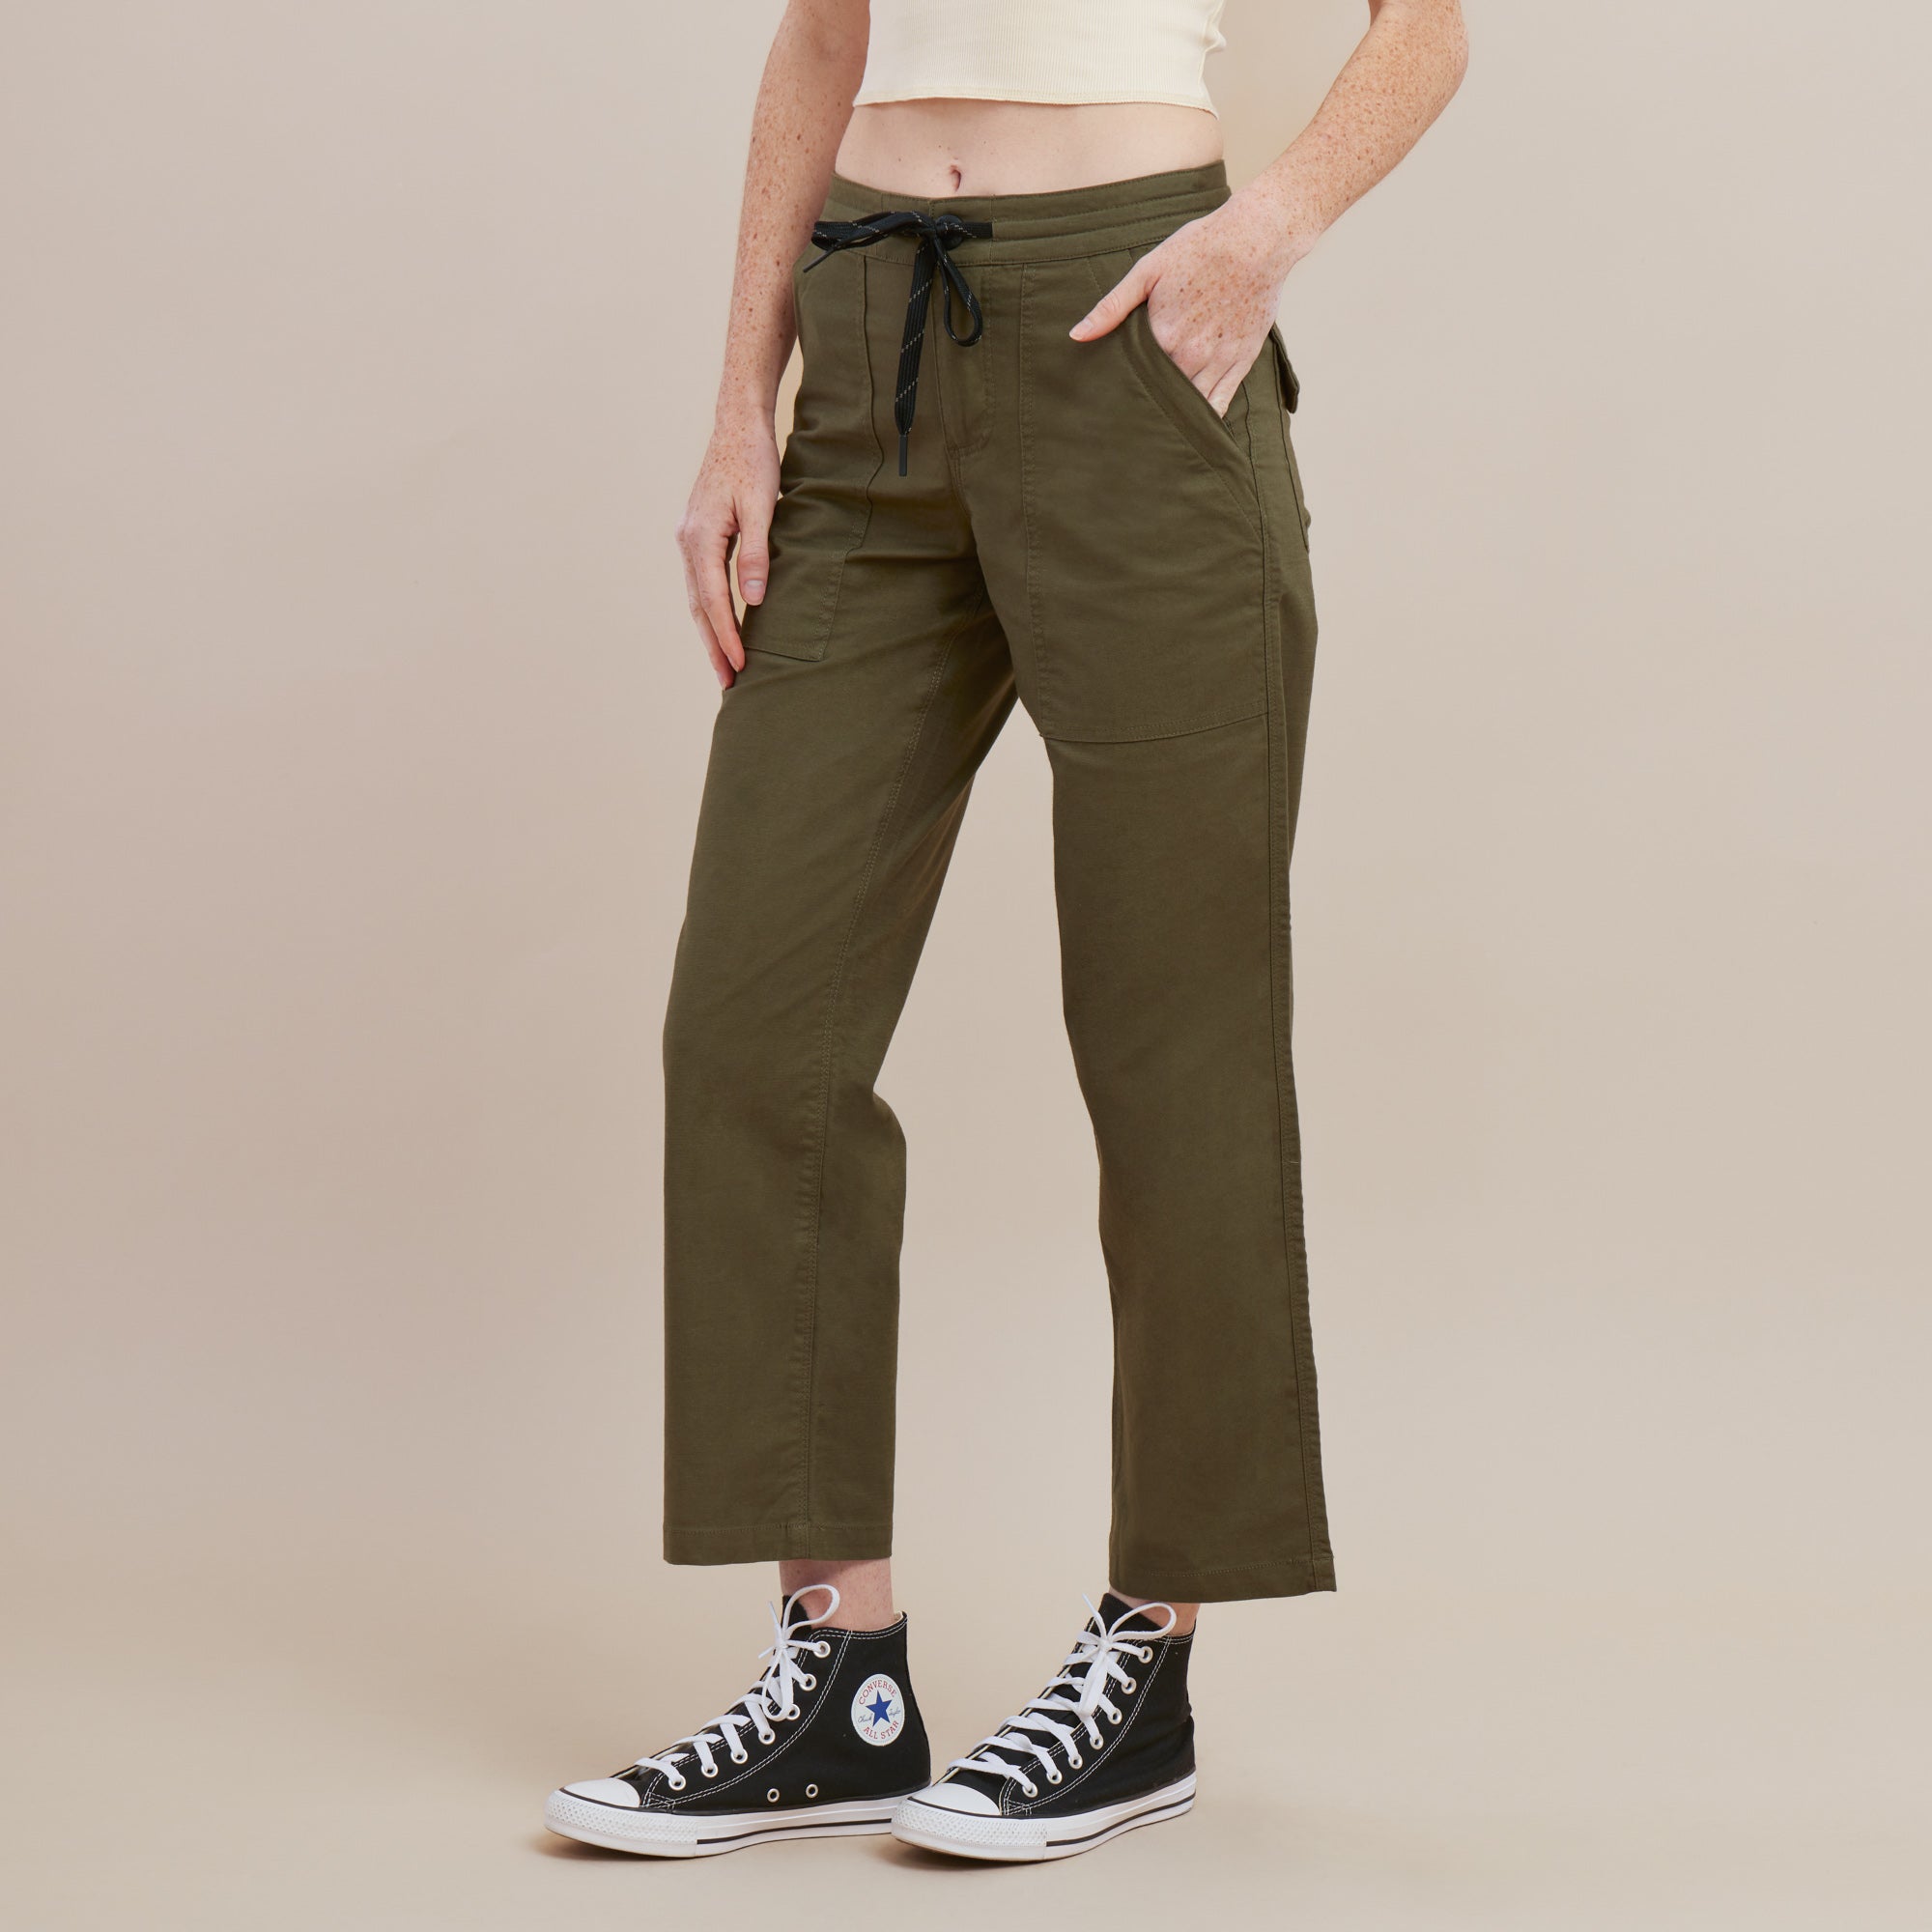 Buy Khaki Trousers & Pants for Women by Outryt Online